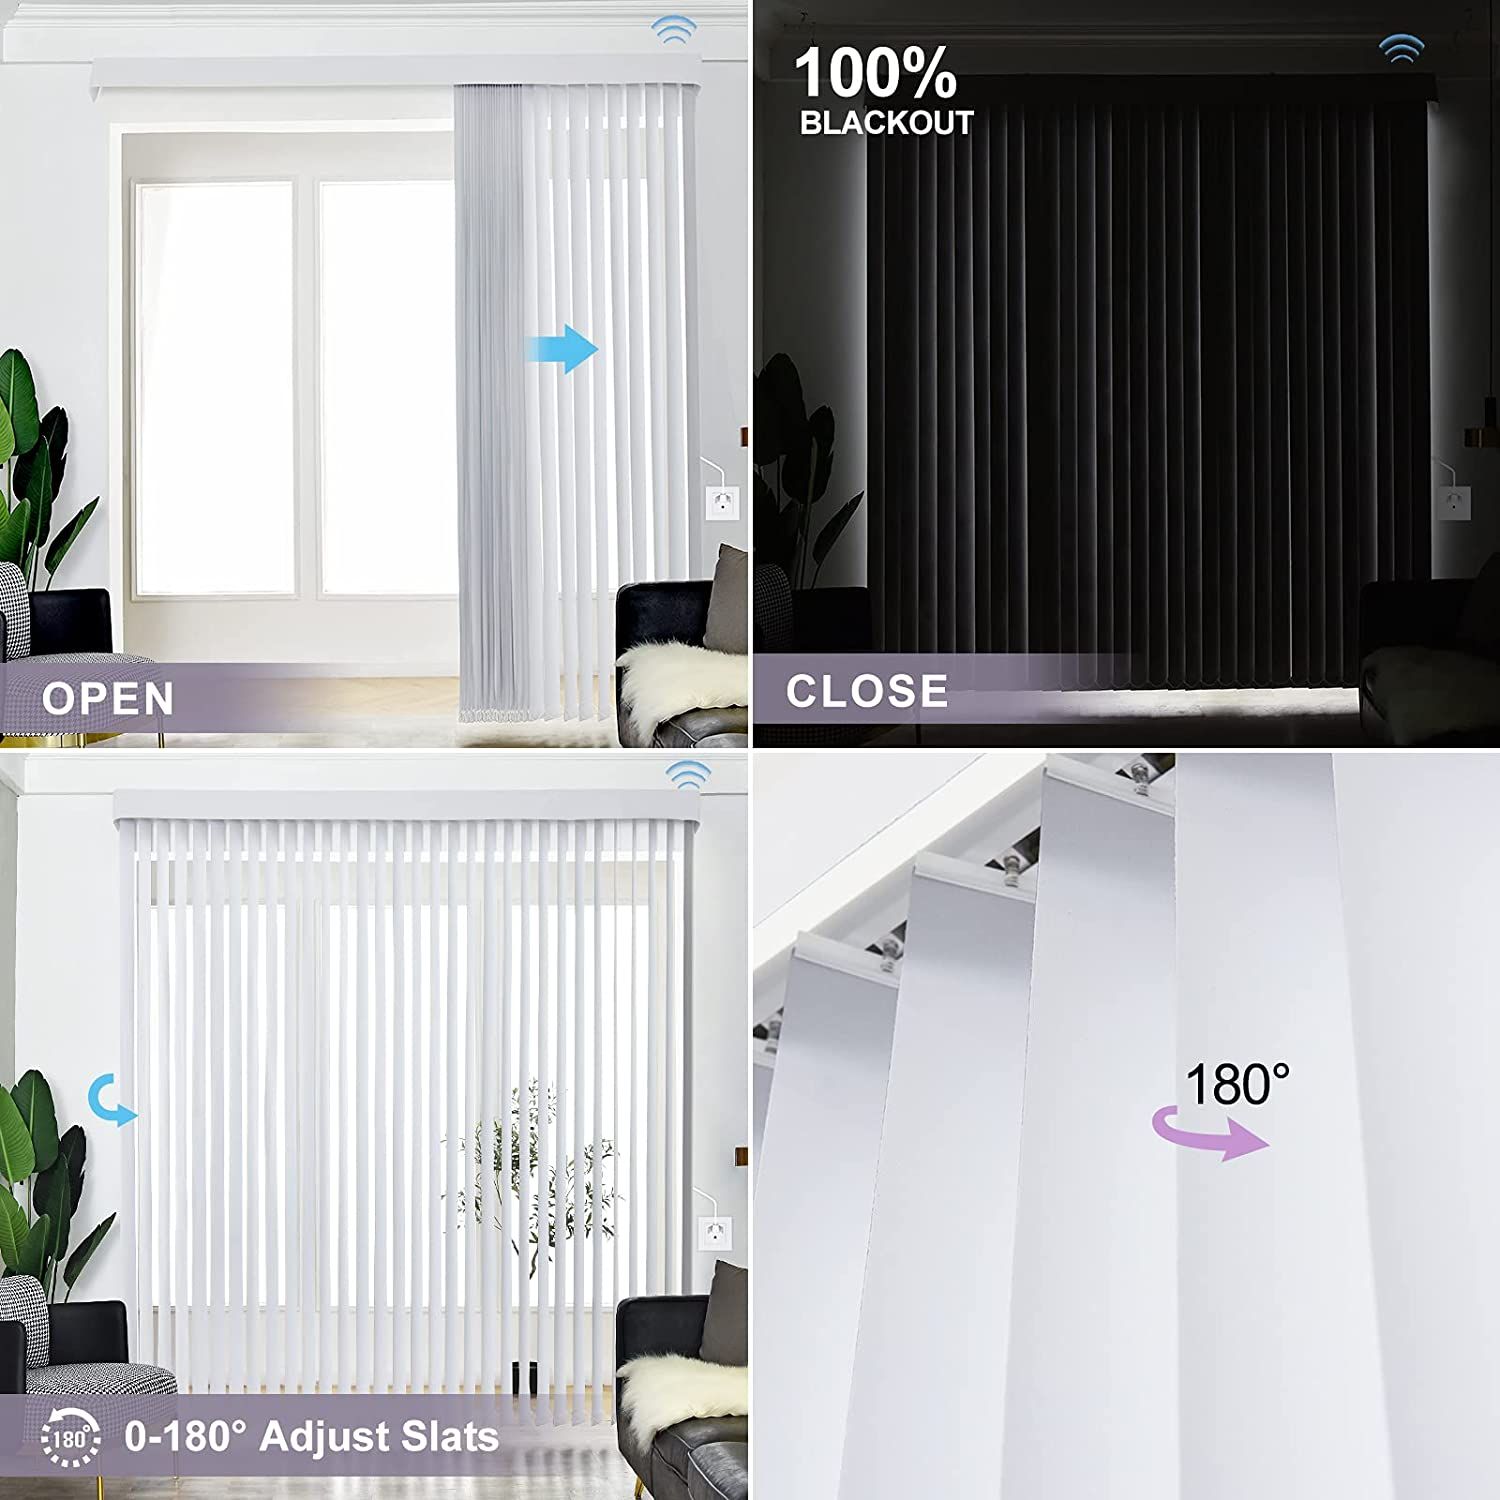 The Best Smart Blinds for Your Home